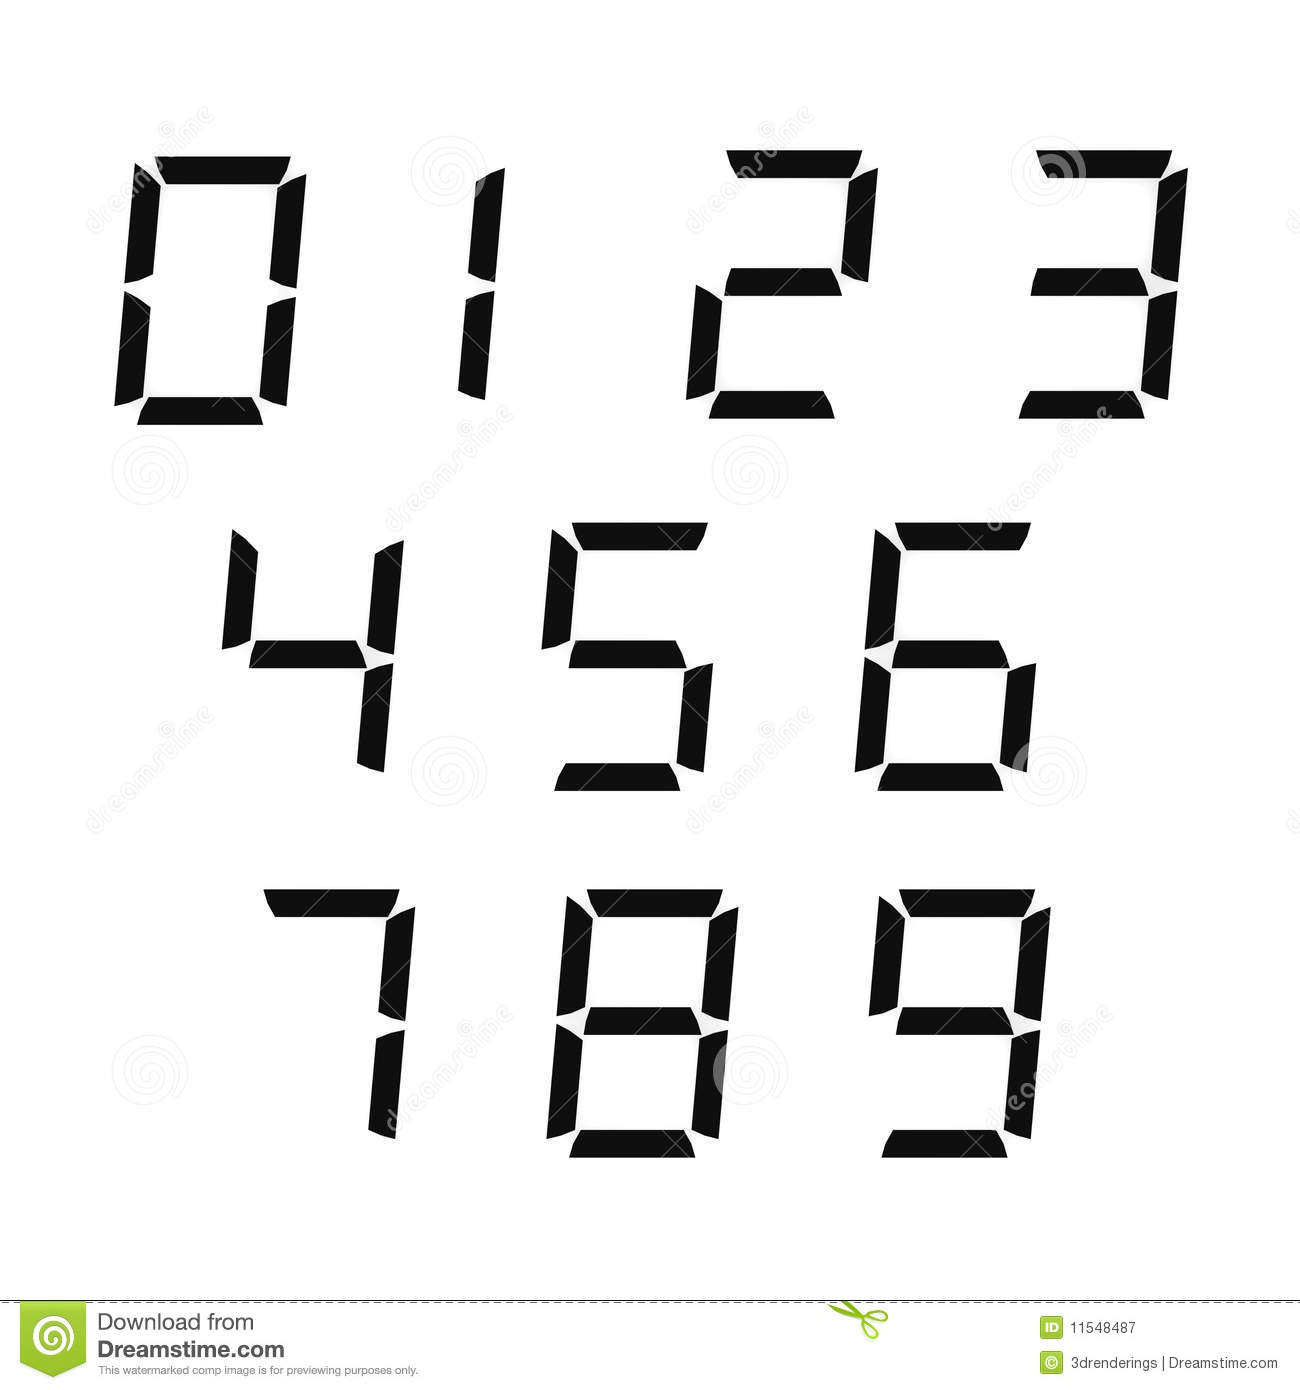 Digital Numbers Royalty Free Stock Photography Image 